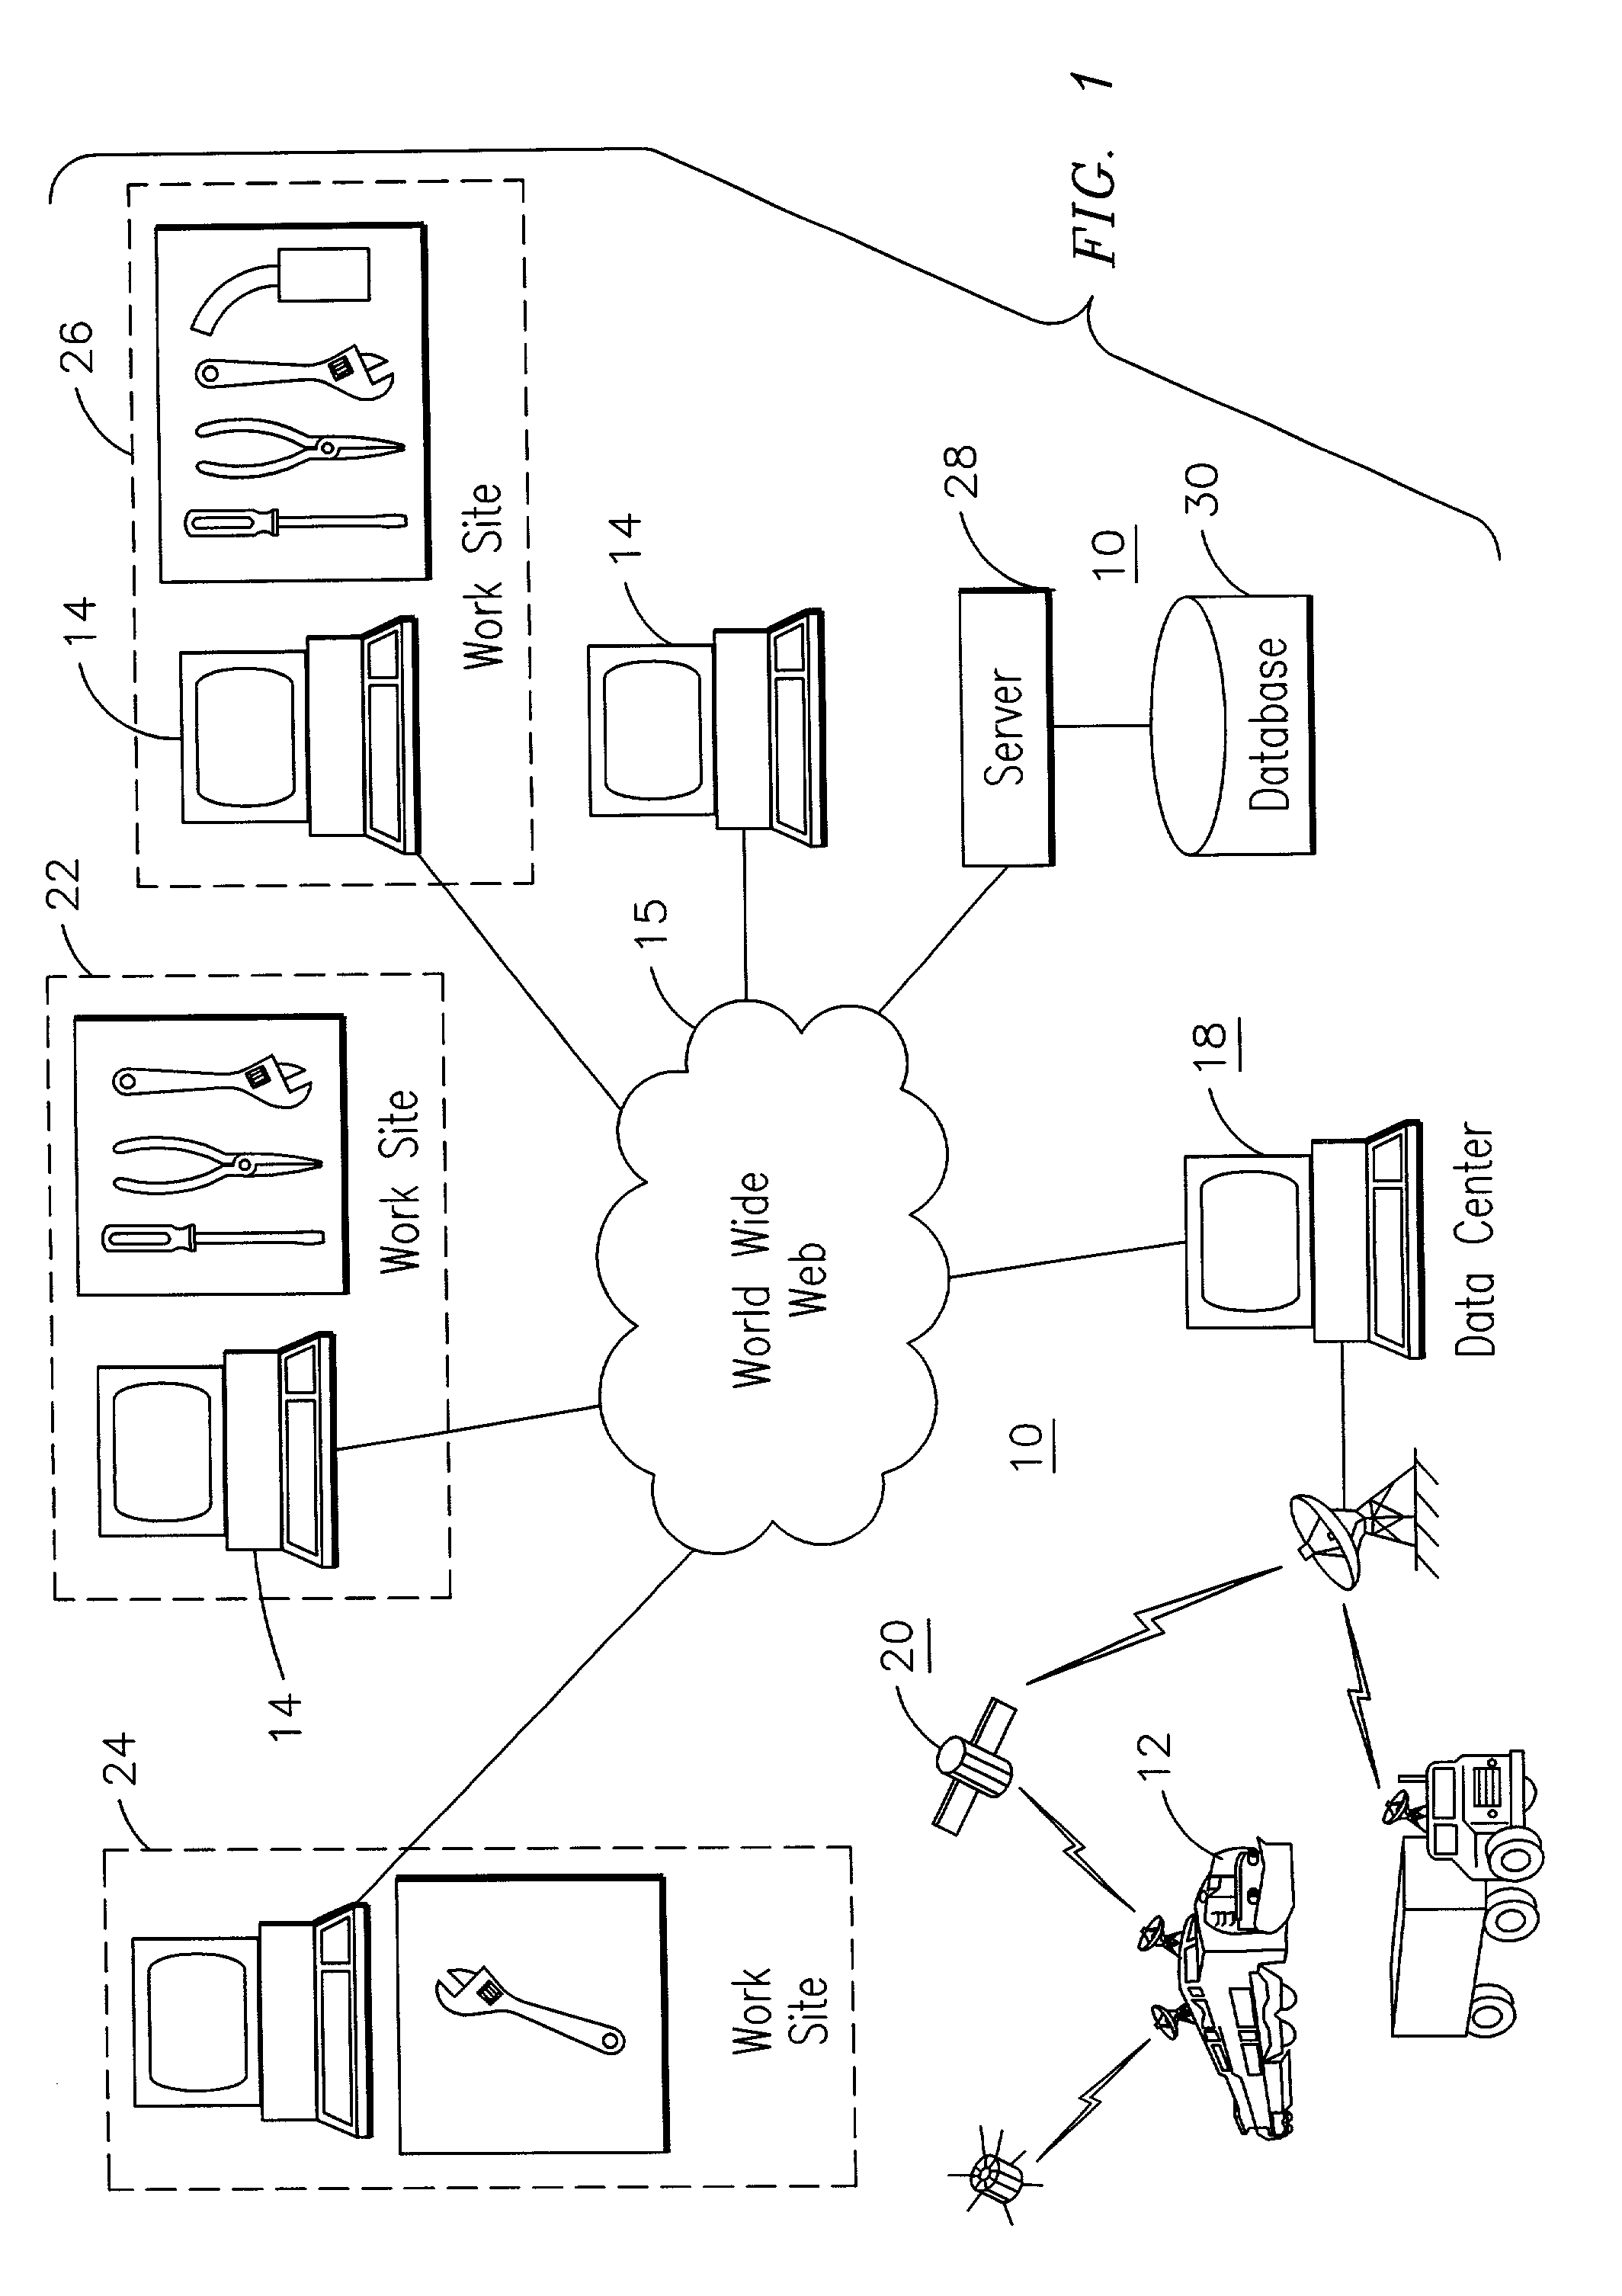 Computerized method and system for guiding service personnel to select a preferred work site for servicing transportation equipment